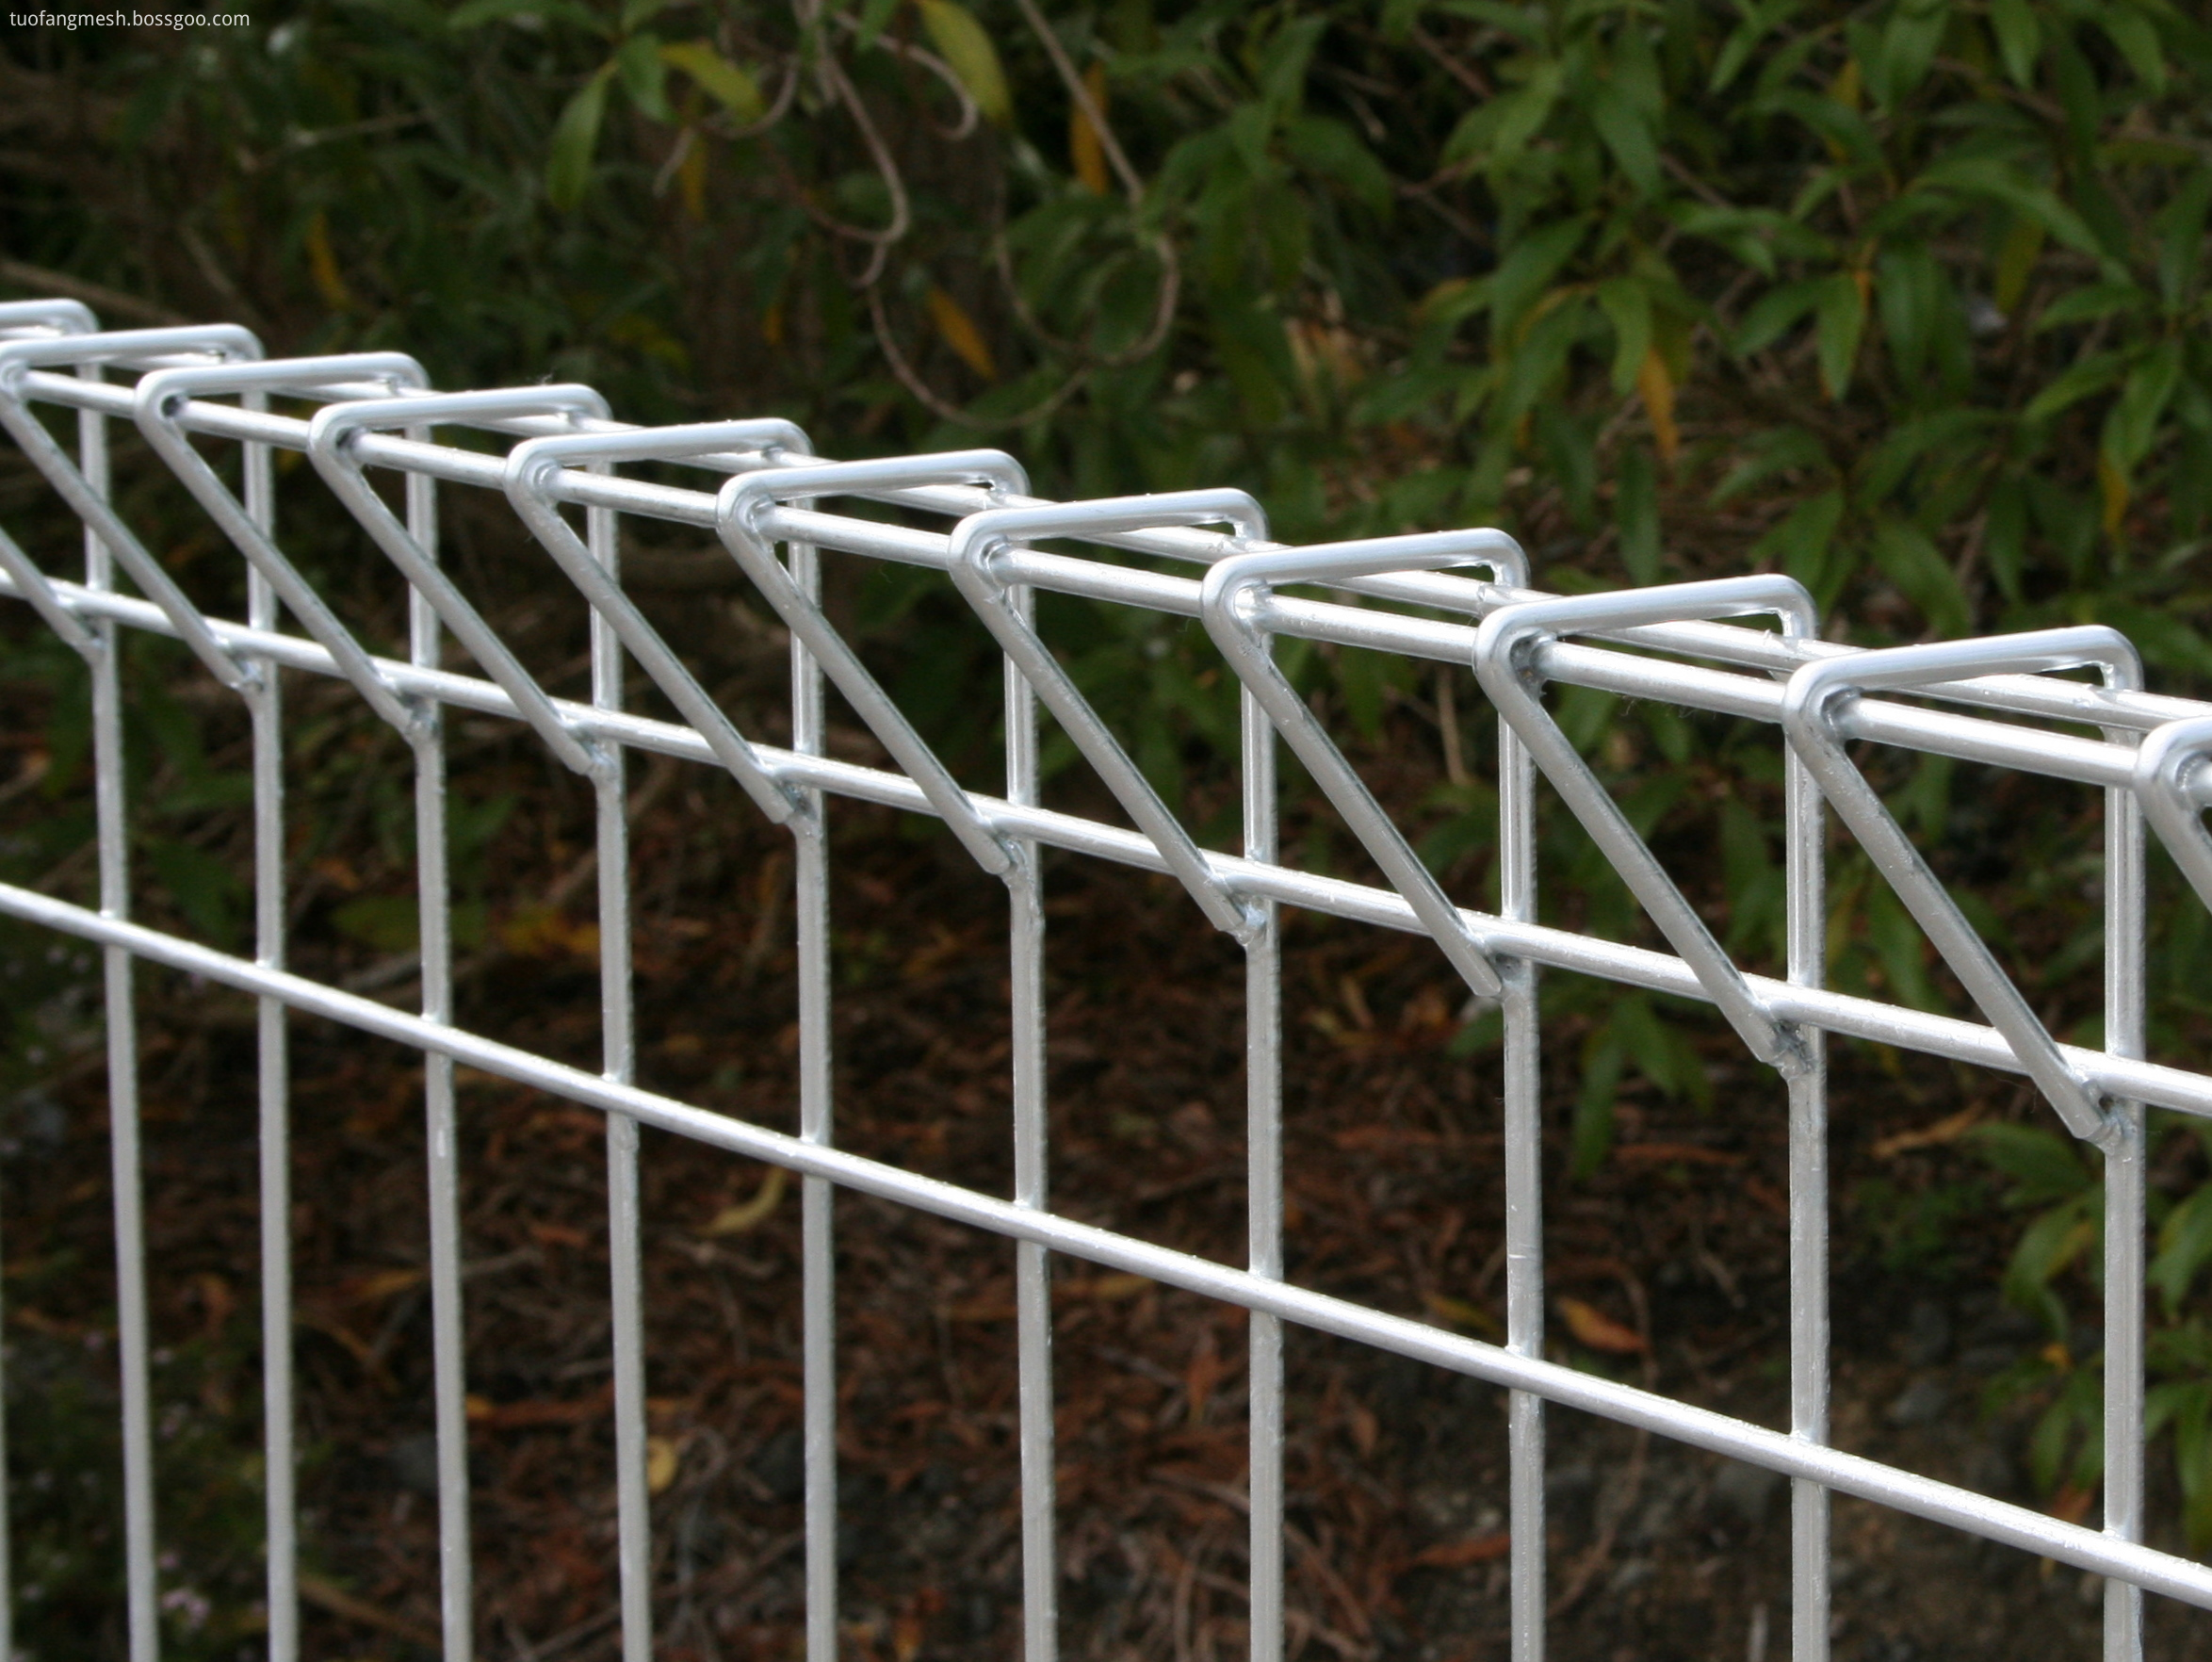 Excellent technology welded BRC fencing